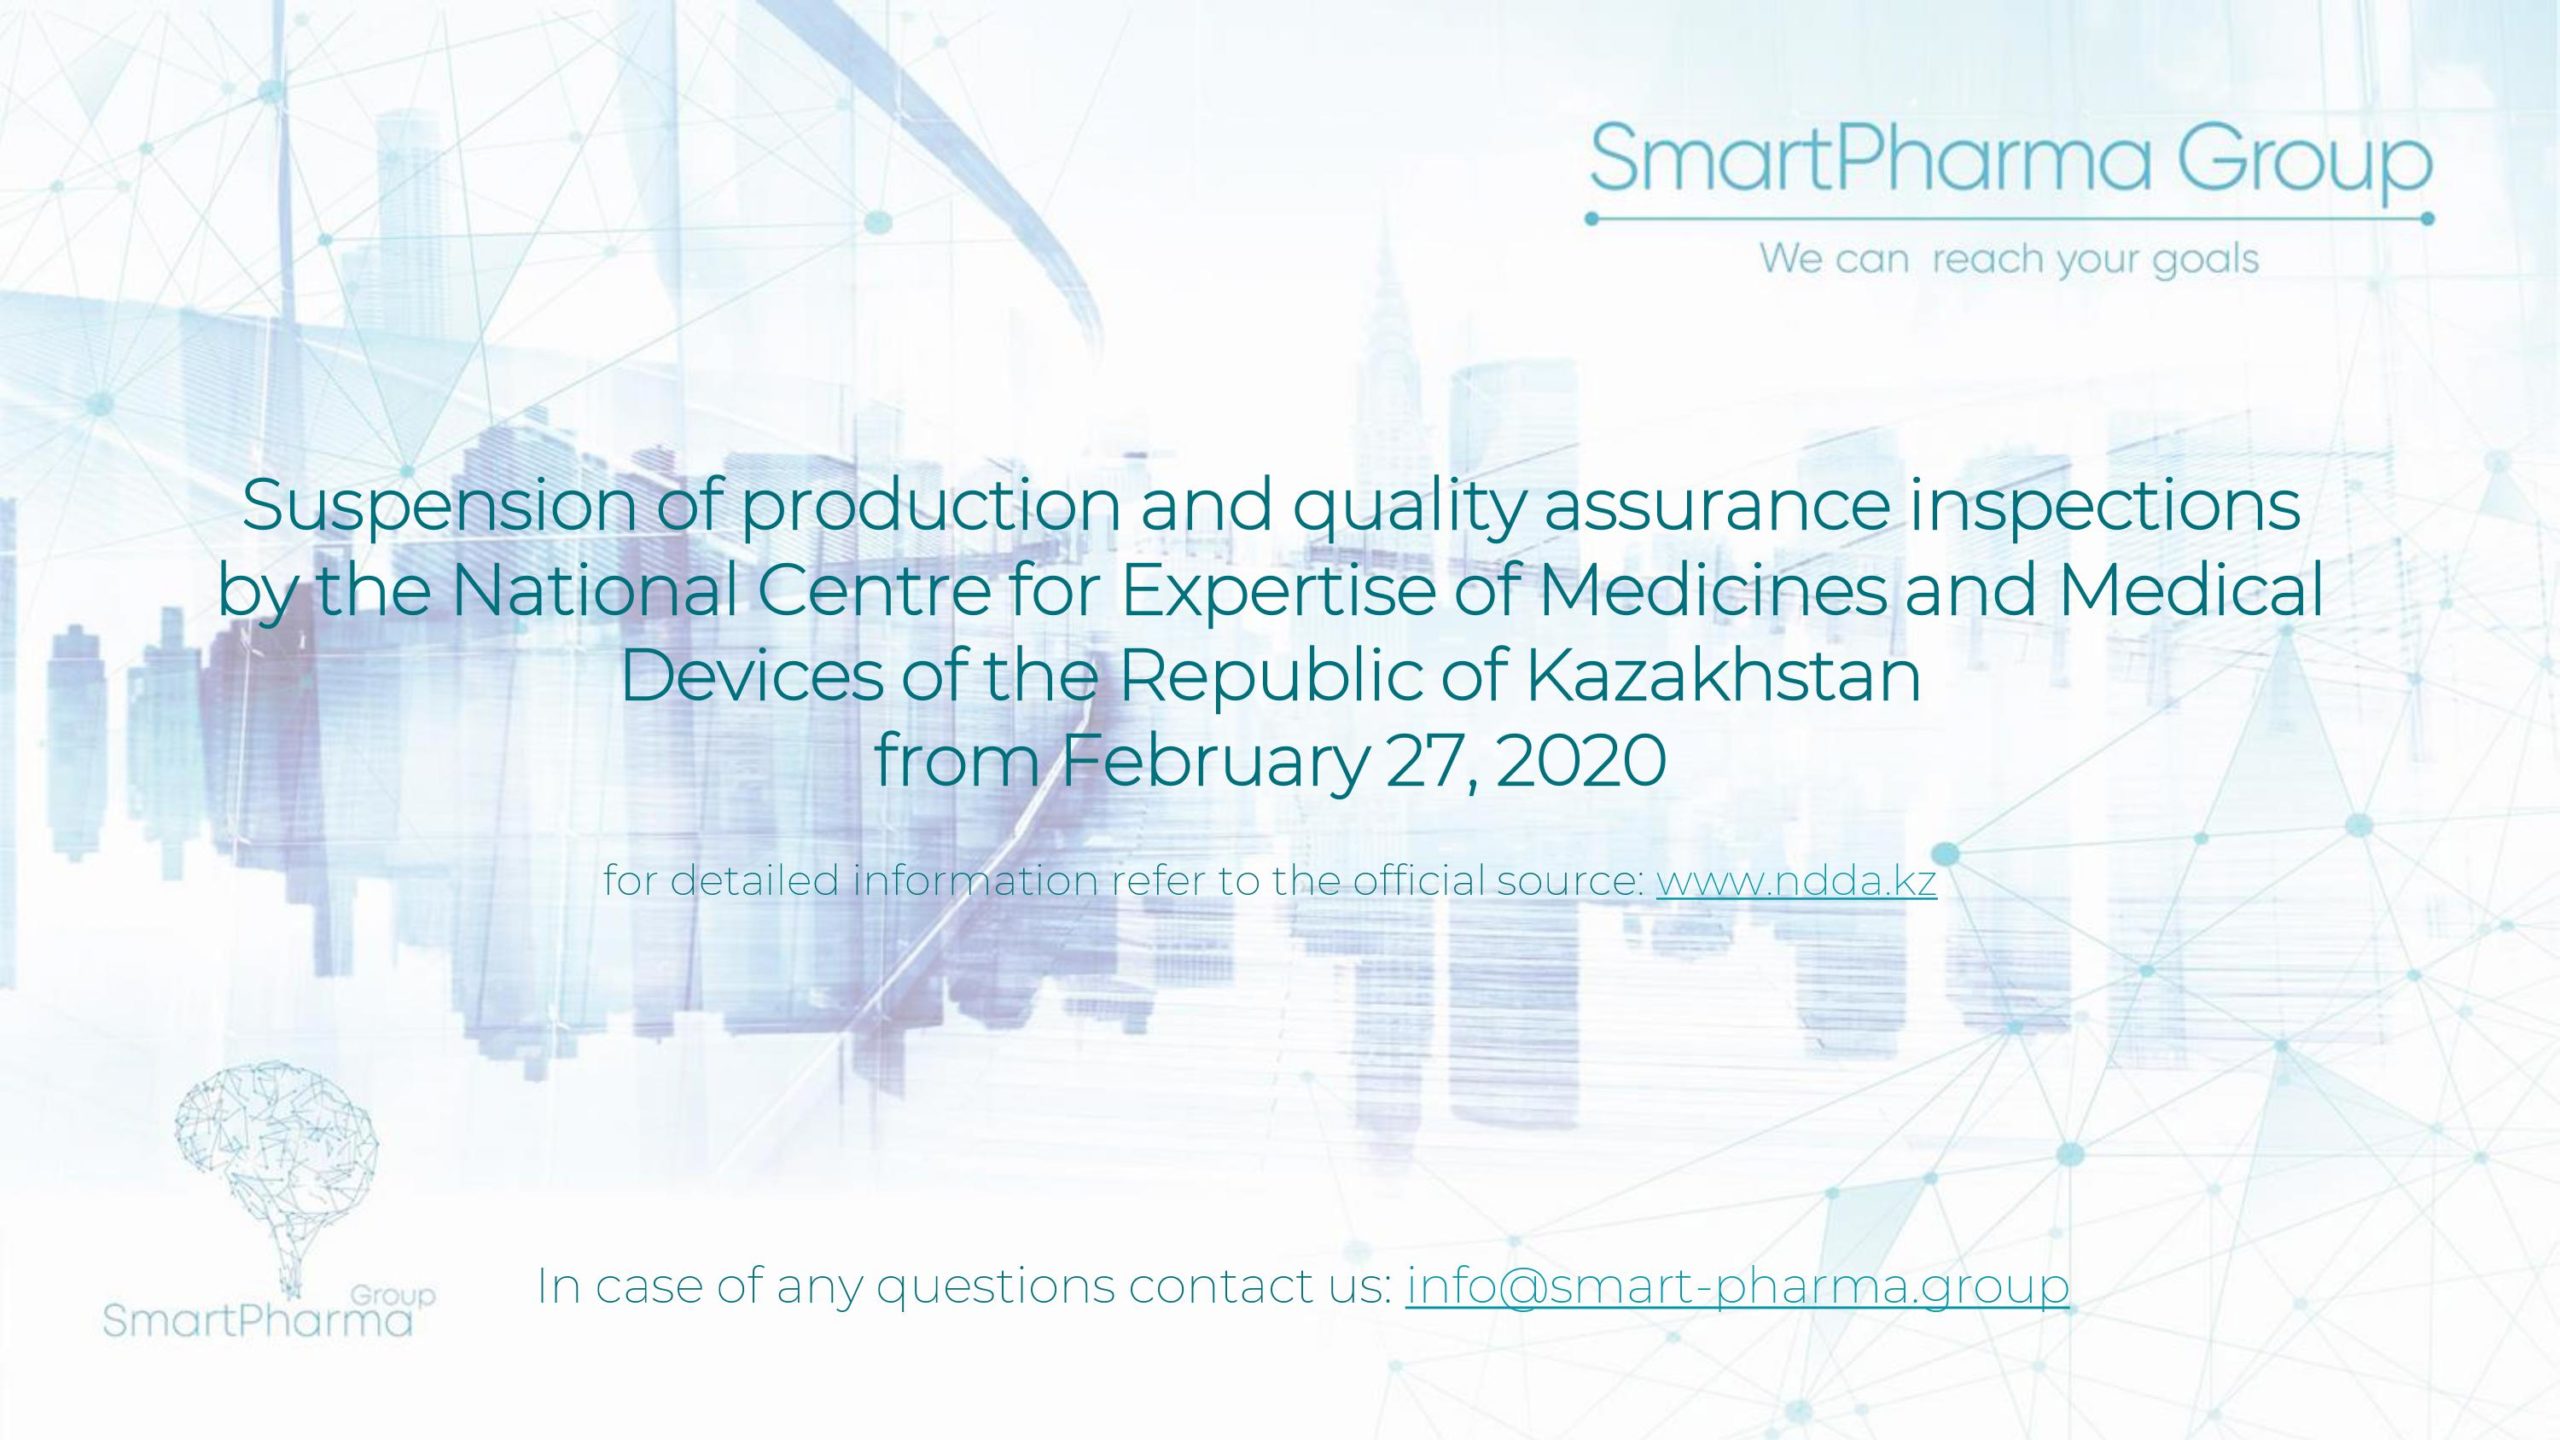 National Centre for Expertise of Medicines and Medical Devices of the Republic of Kazakhstan has indefinitely suspended production and quality assurance inspections from February 27, 2020.